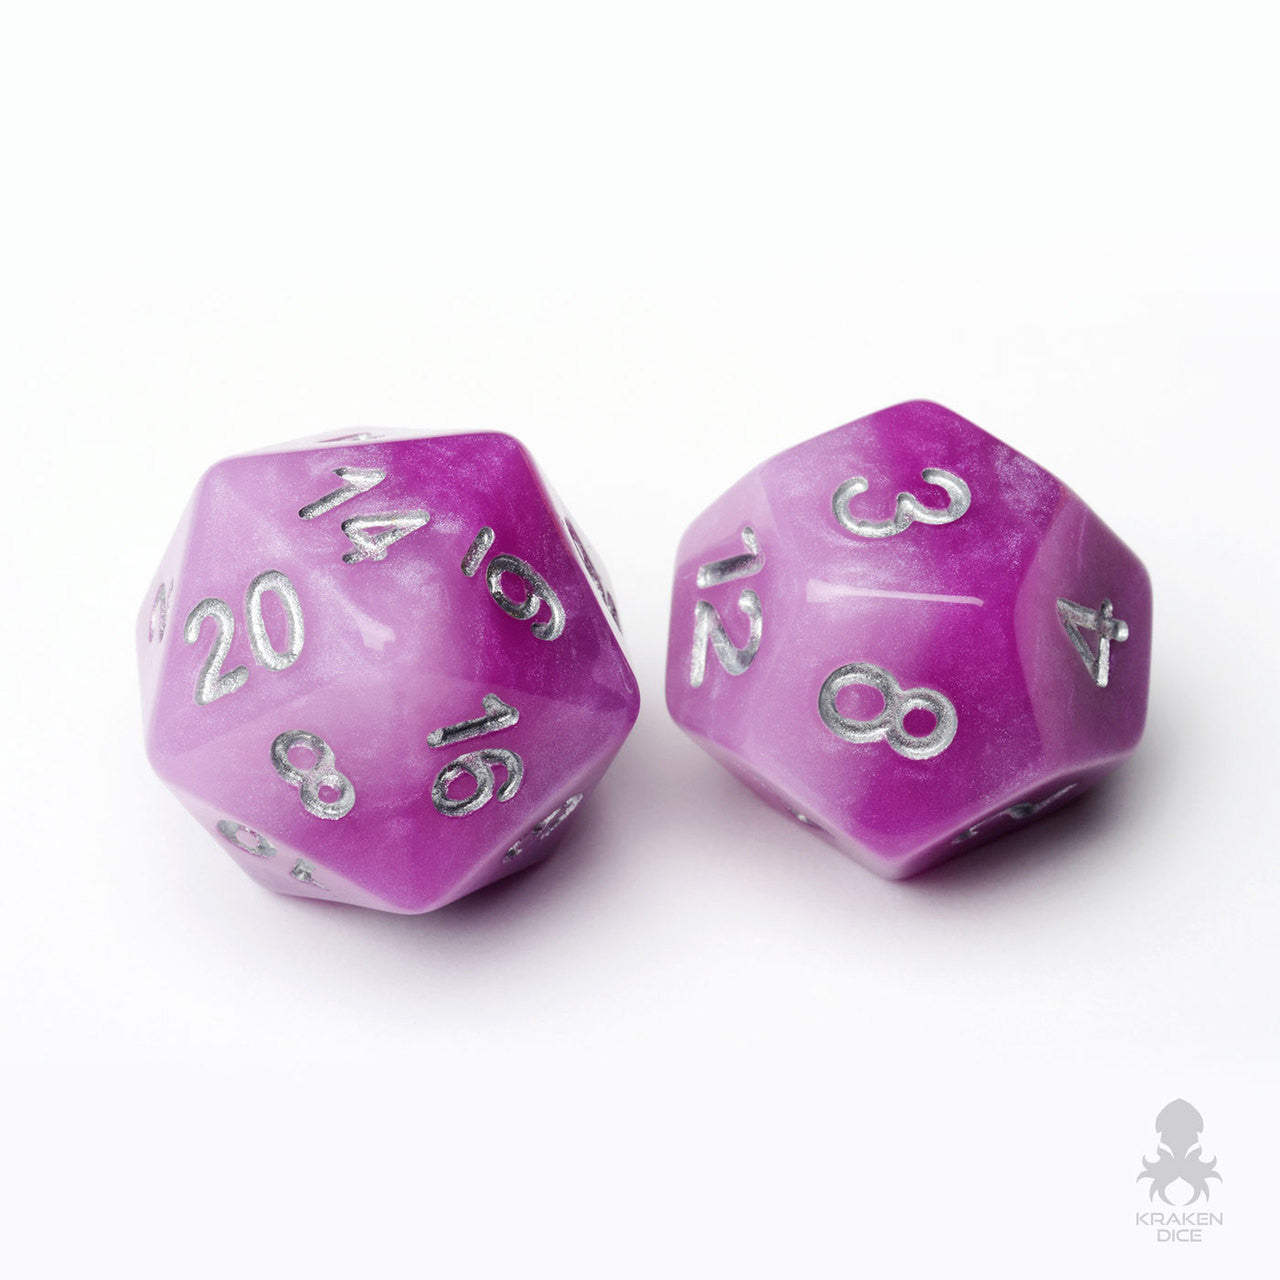 Purple Ombre 7pc Dice Set Inked in Silver